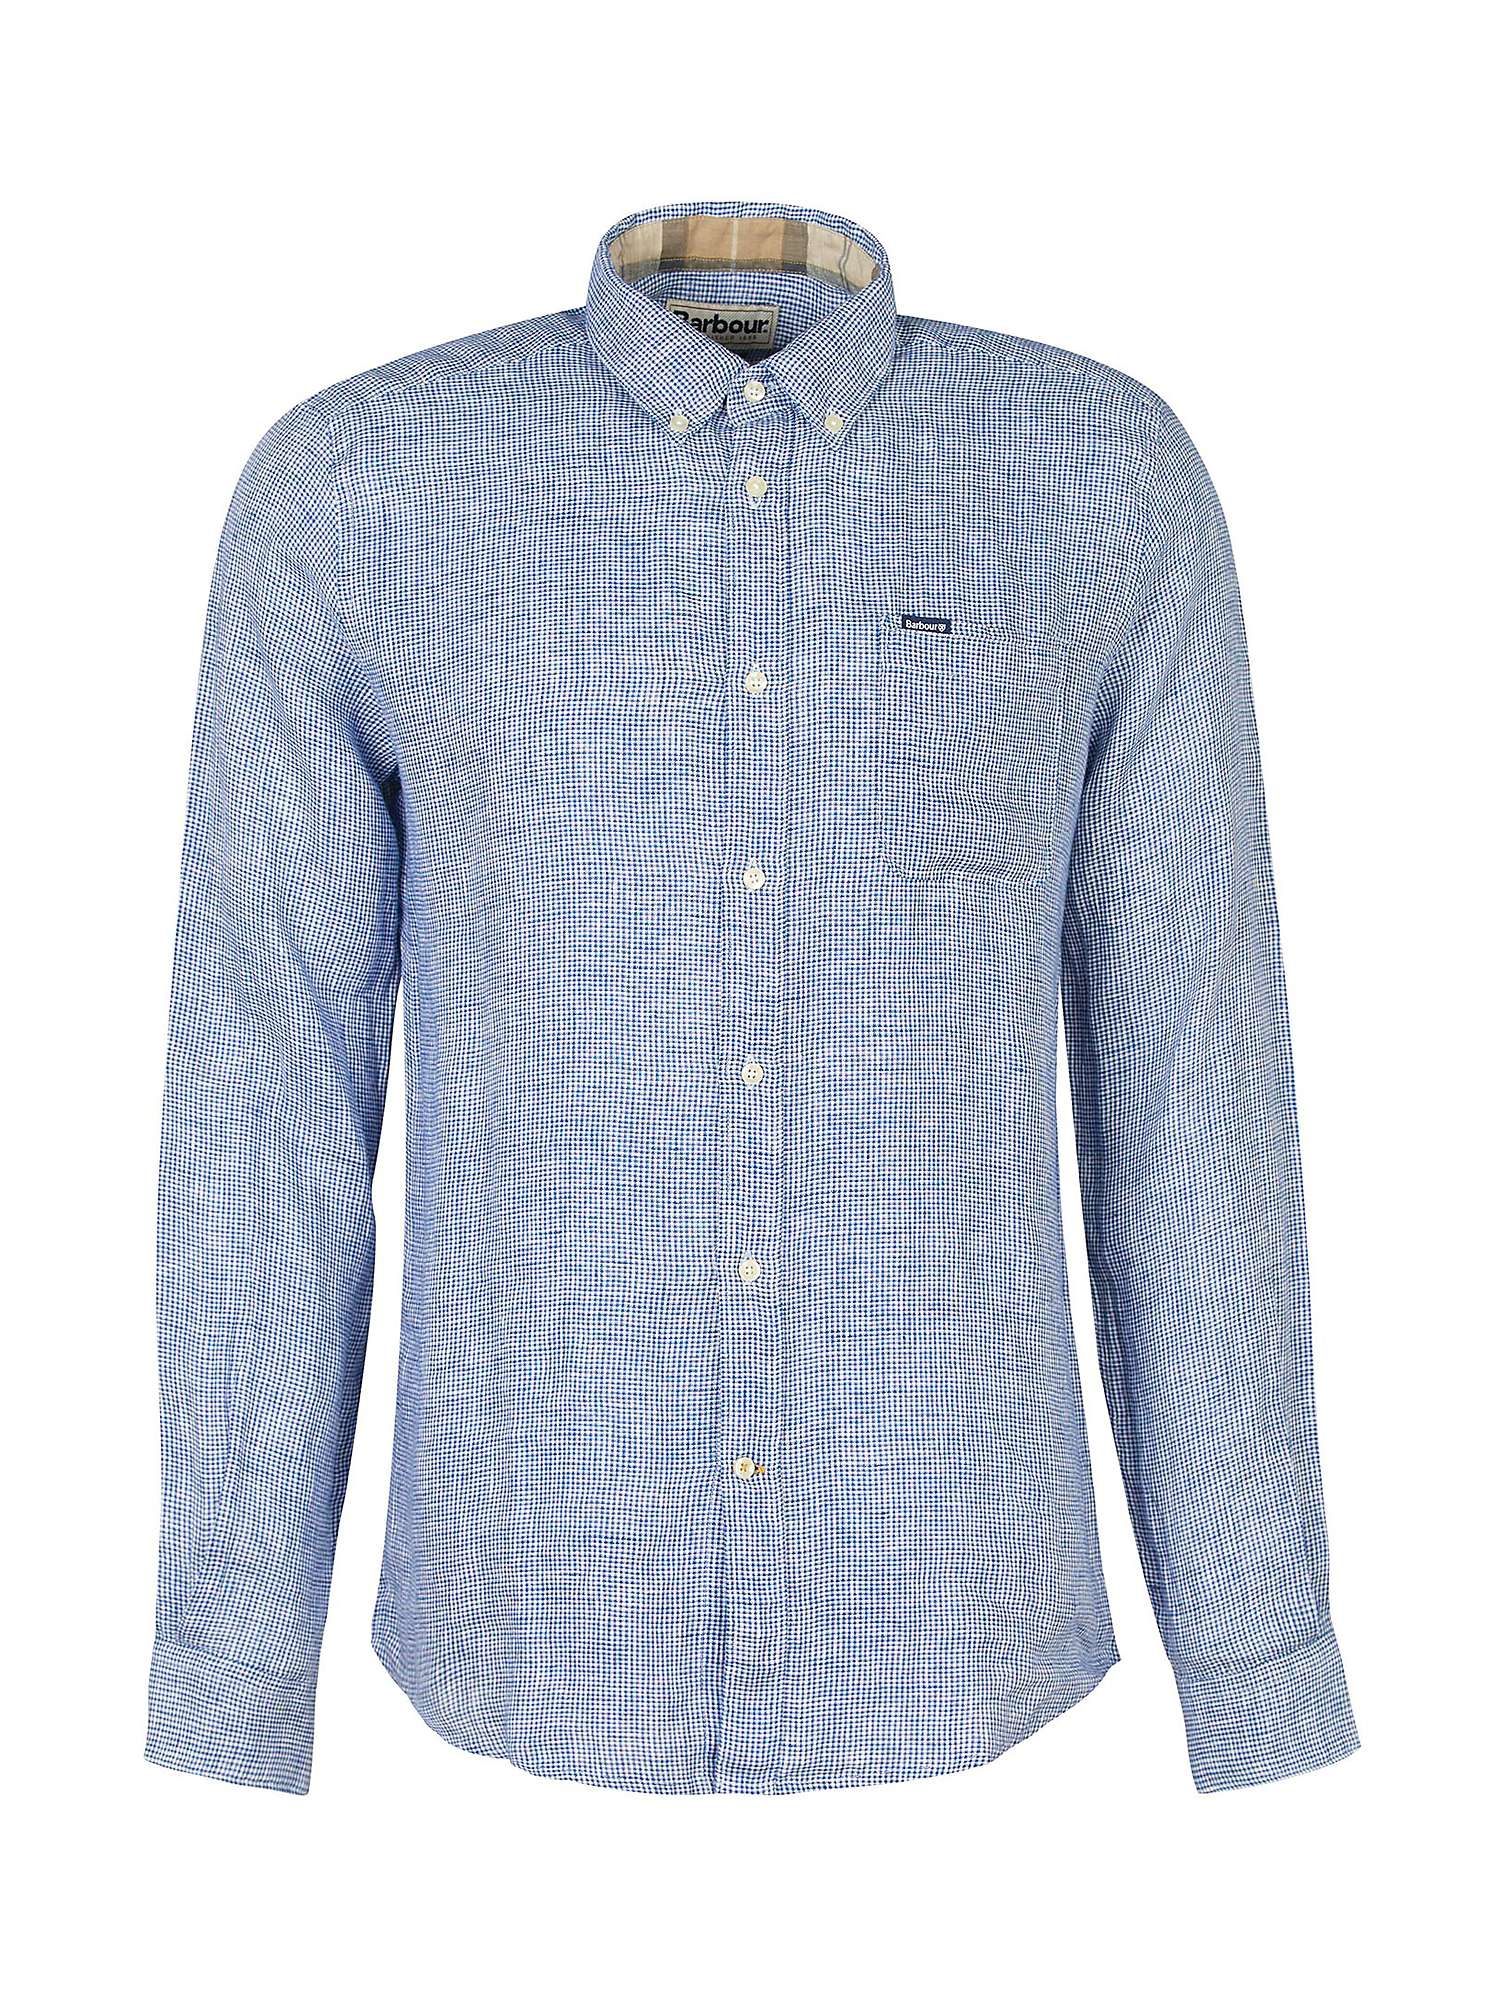 Buy Barbour Linton Tailored Shirt, Navy Online at johnlewis.com